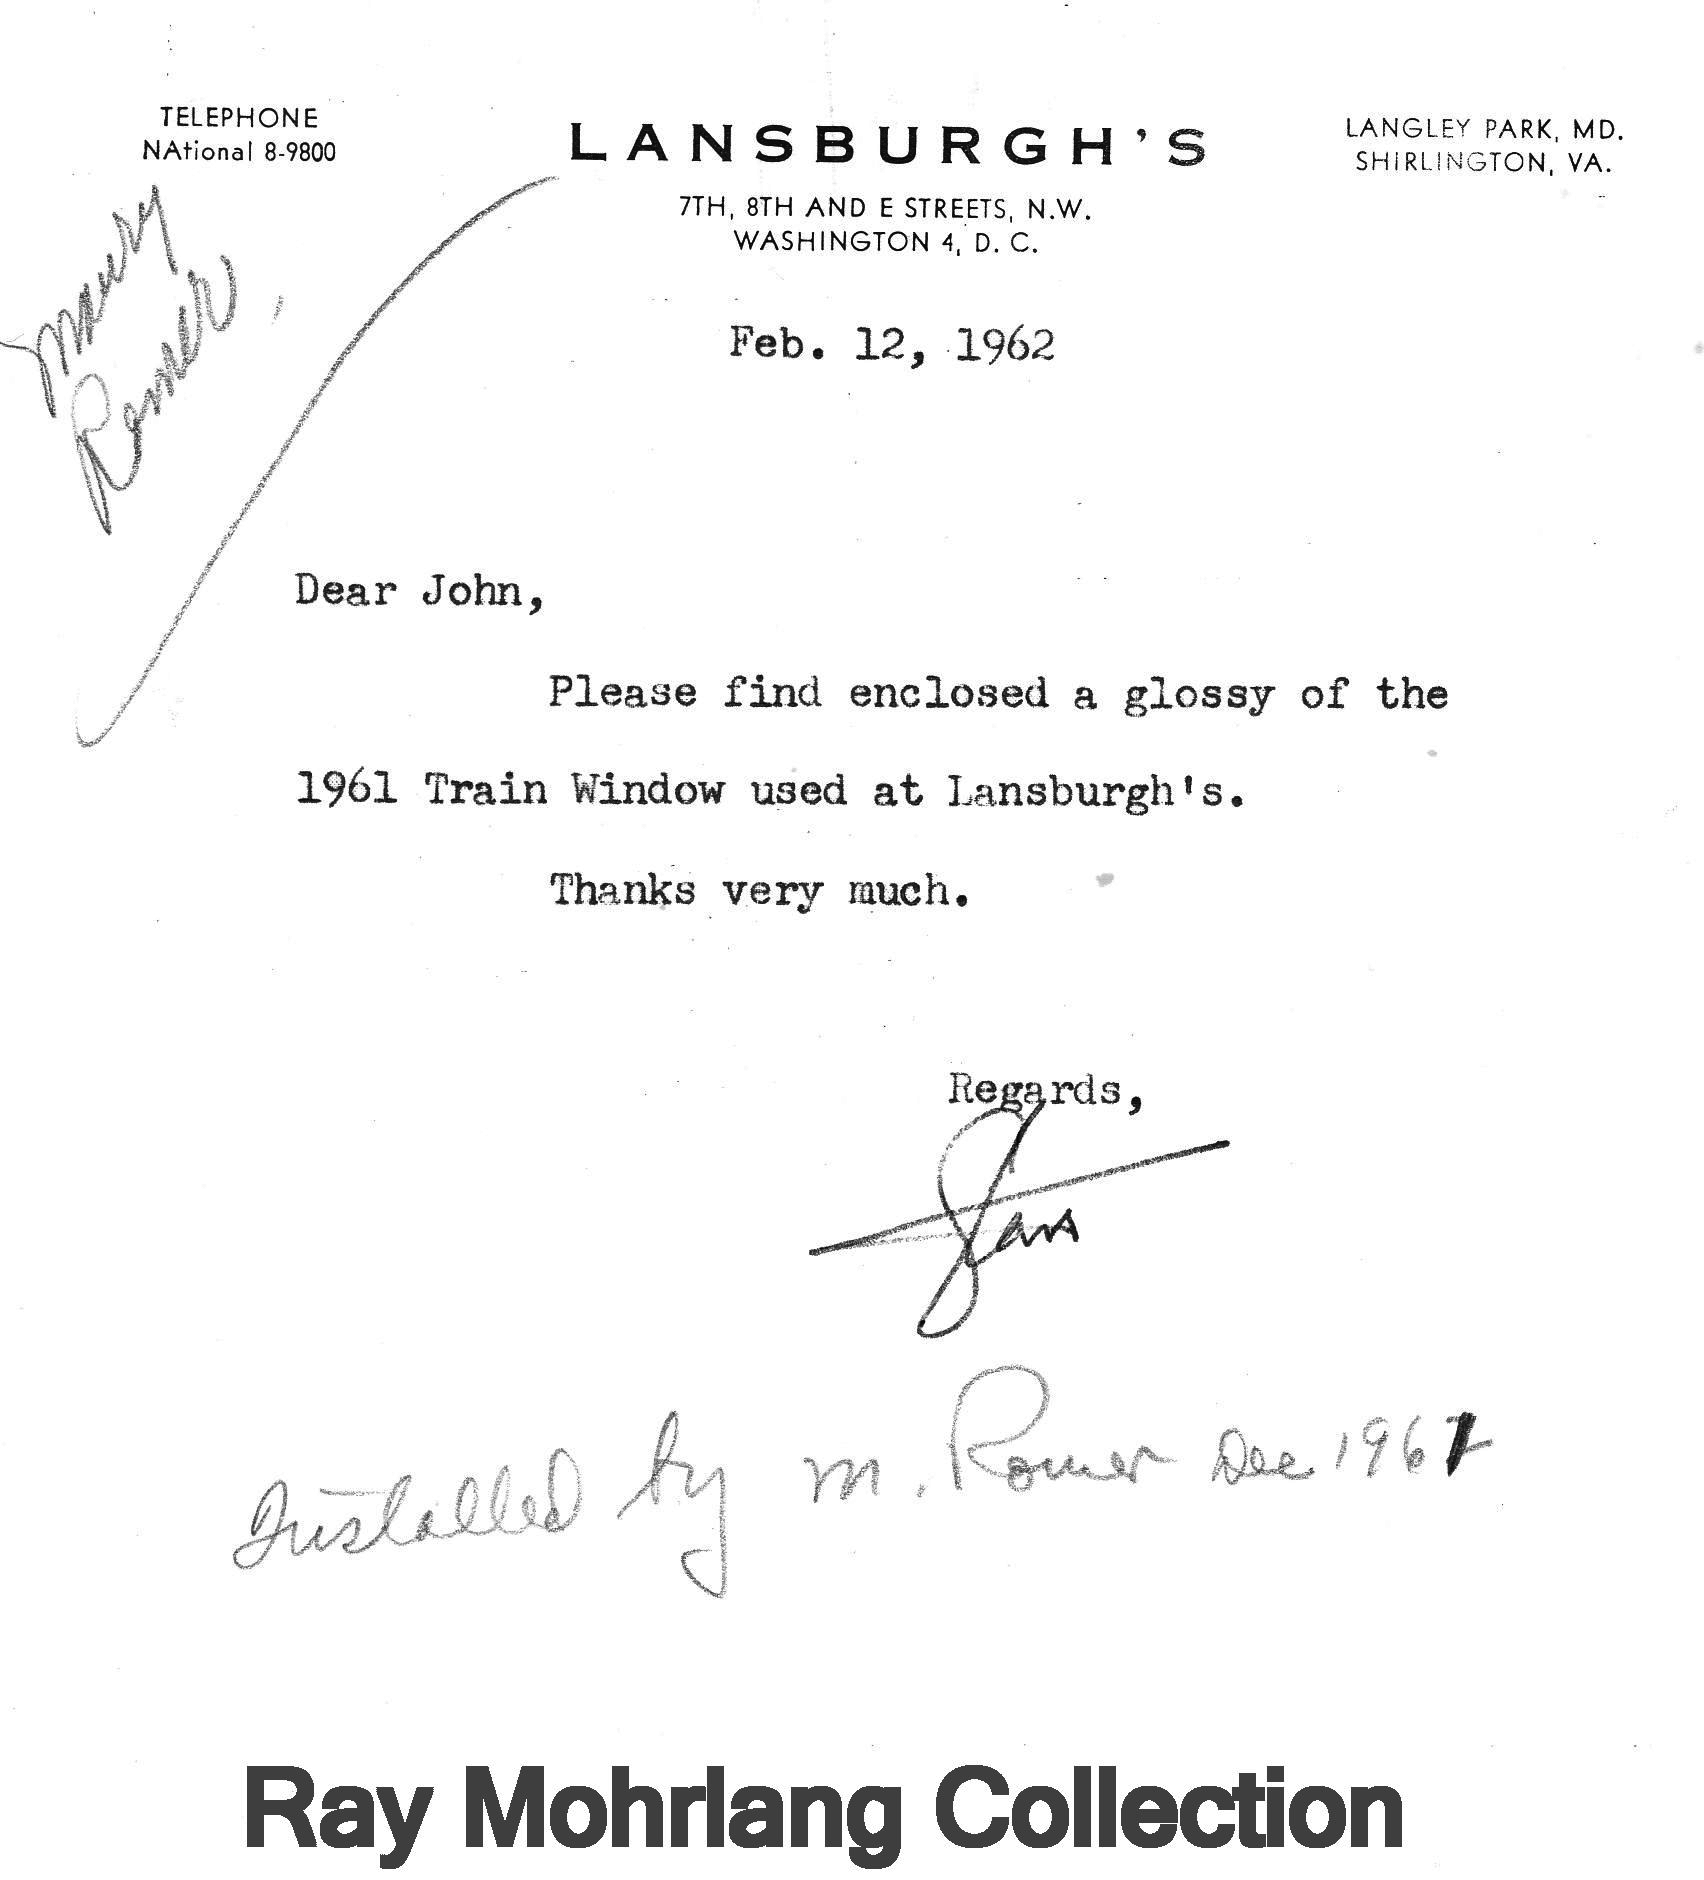 Letter From Lansburgh's